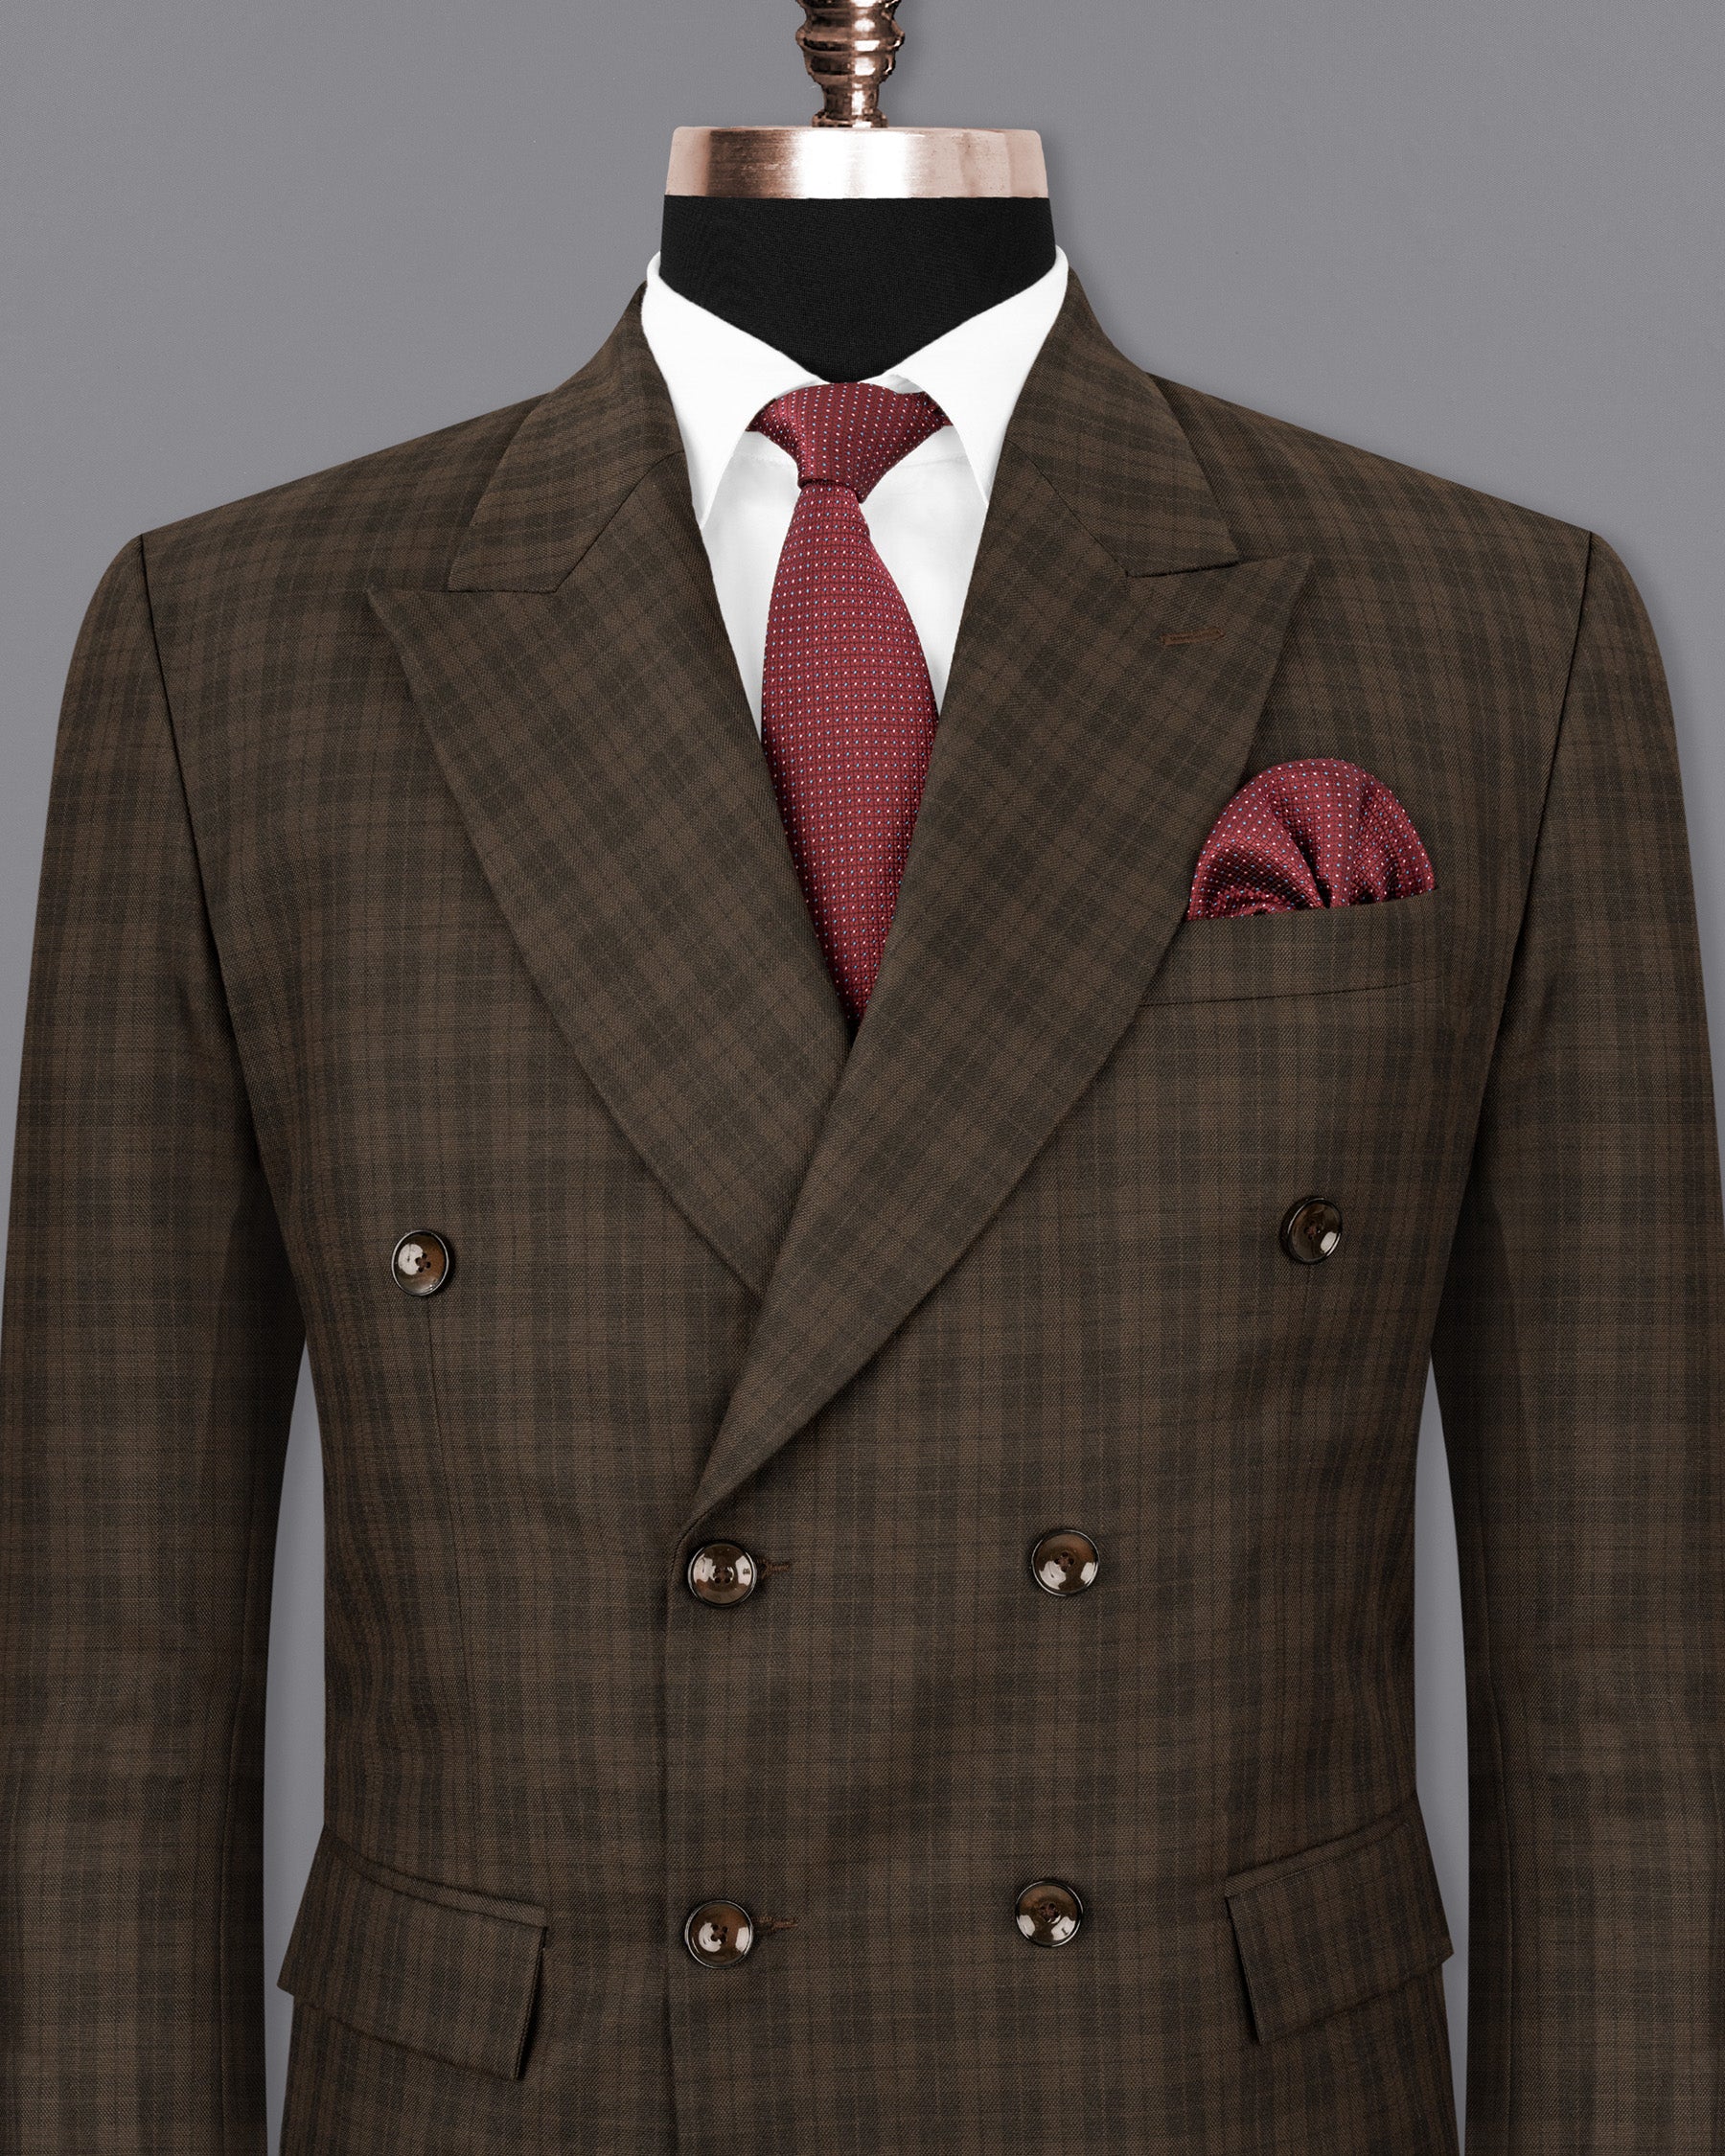 Armadillo Brown Plaid Double-breasted Blazer BL1755-DB-36,BL1755-DB-38,BL1755-DB-40,BL1755-DB-42,BL1755-DB-44,BL1755-DB-46,BL1755-DB-48,BL1755-DB-50,BL1755-DB-52,BL1755-DB-54,BL1755-DB-56,BL1755-DB-58,BL1755-DB-60